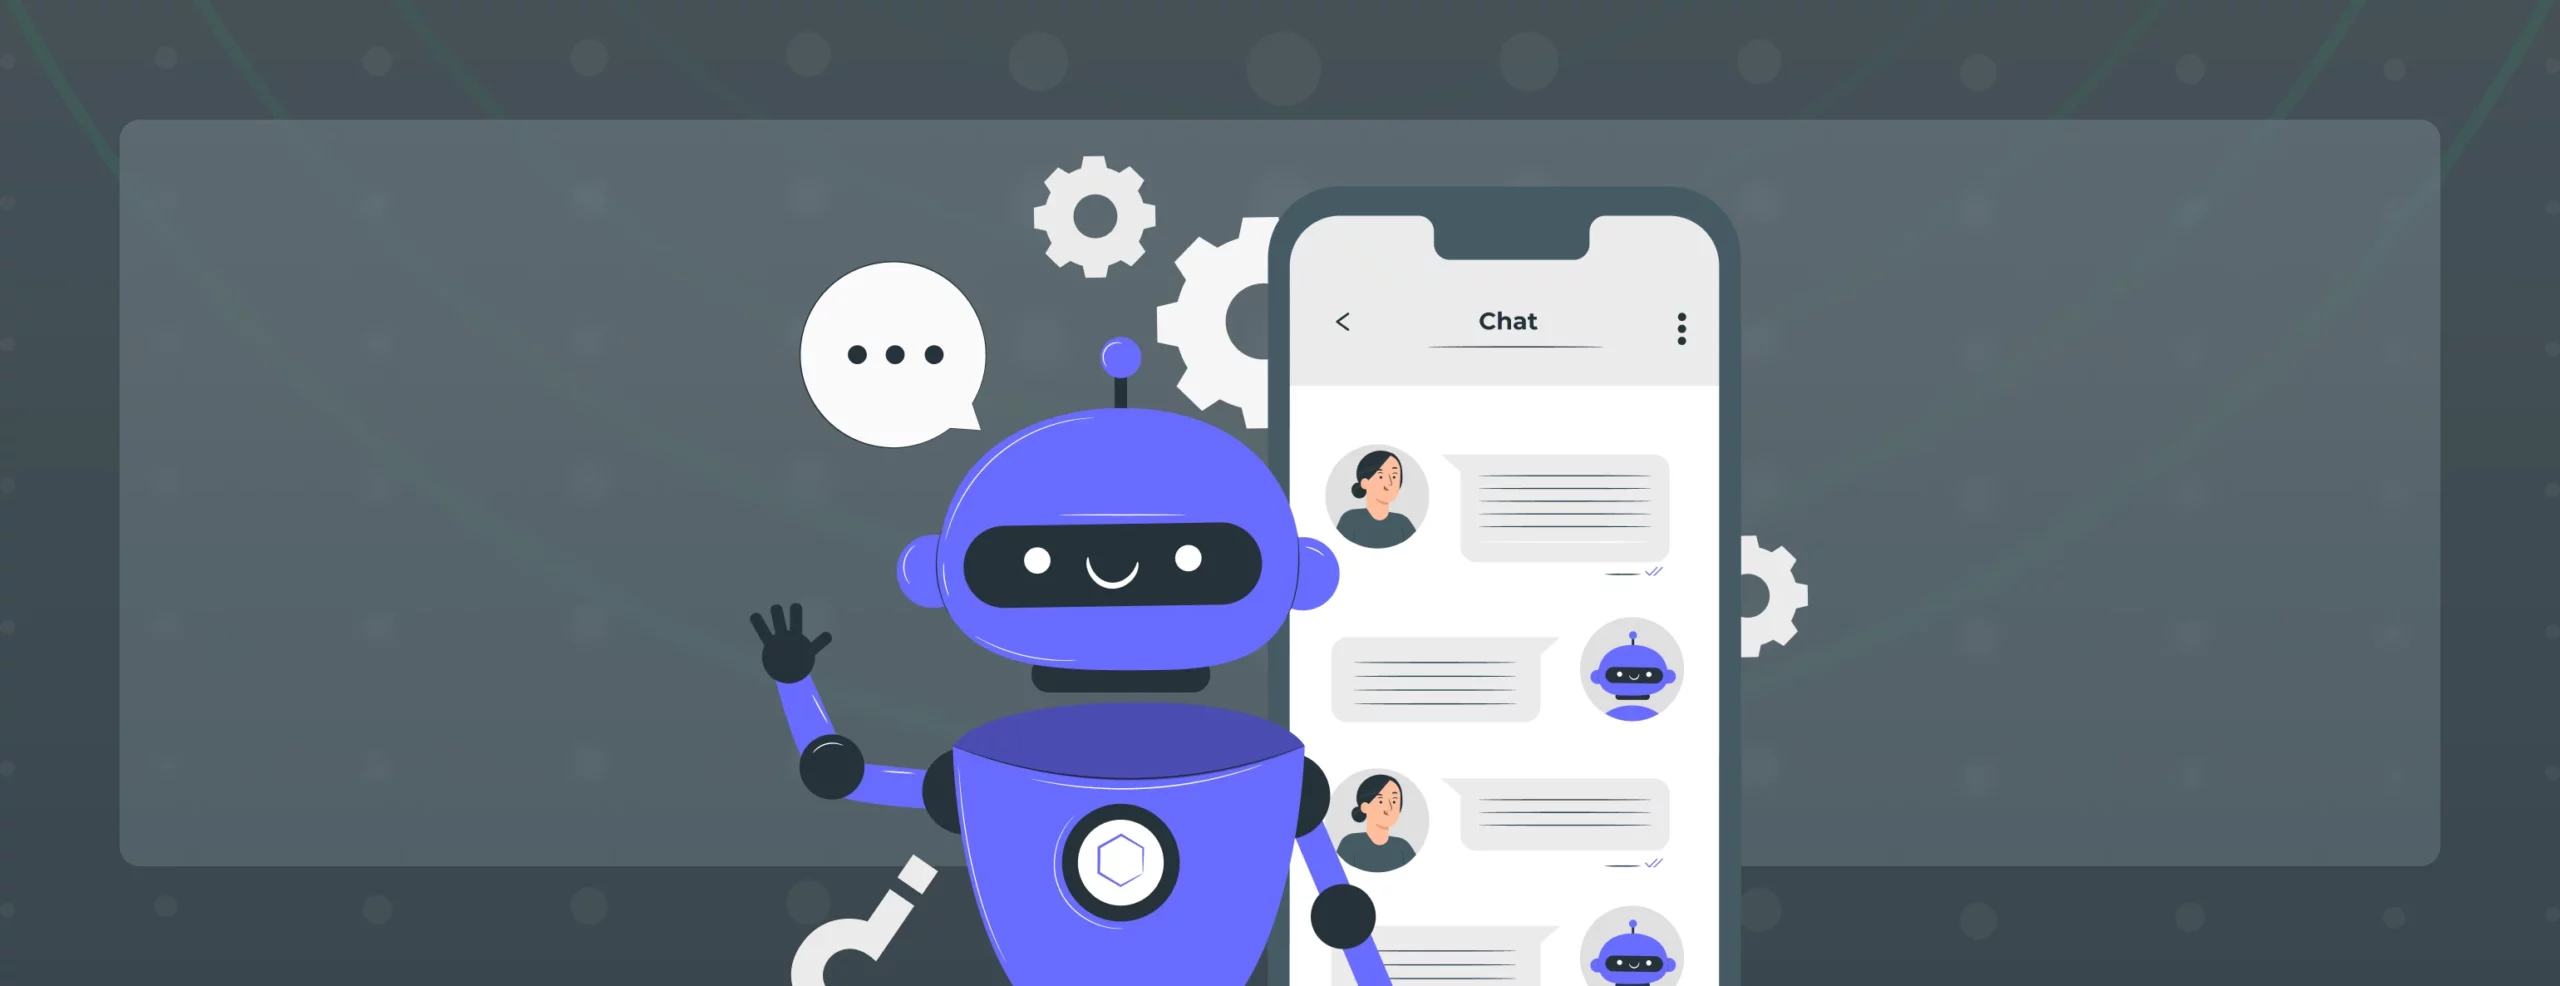 How to build a chatbot with AI and low-code